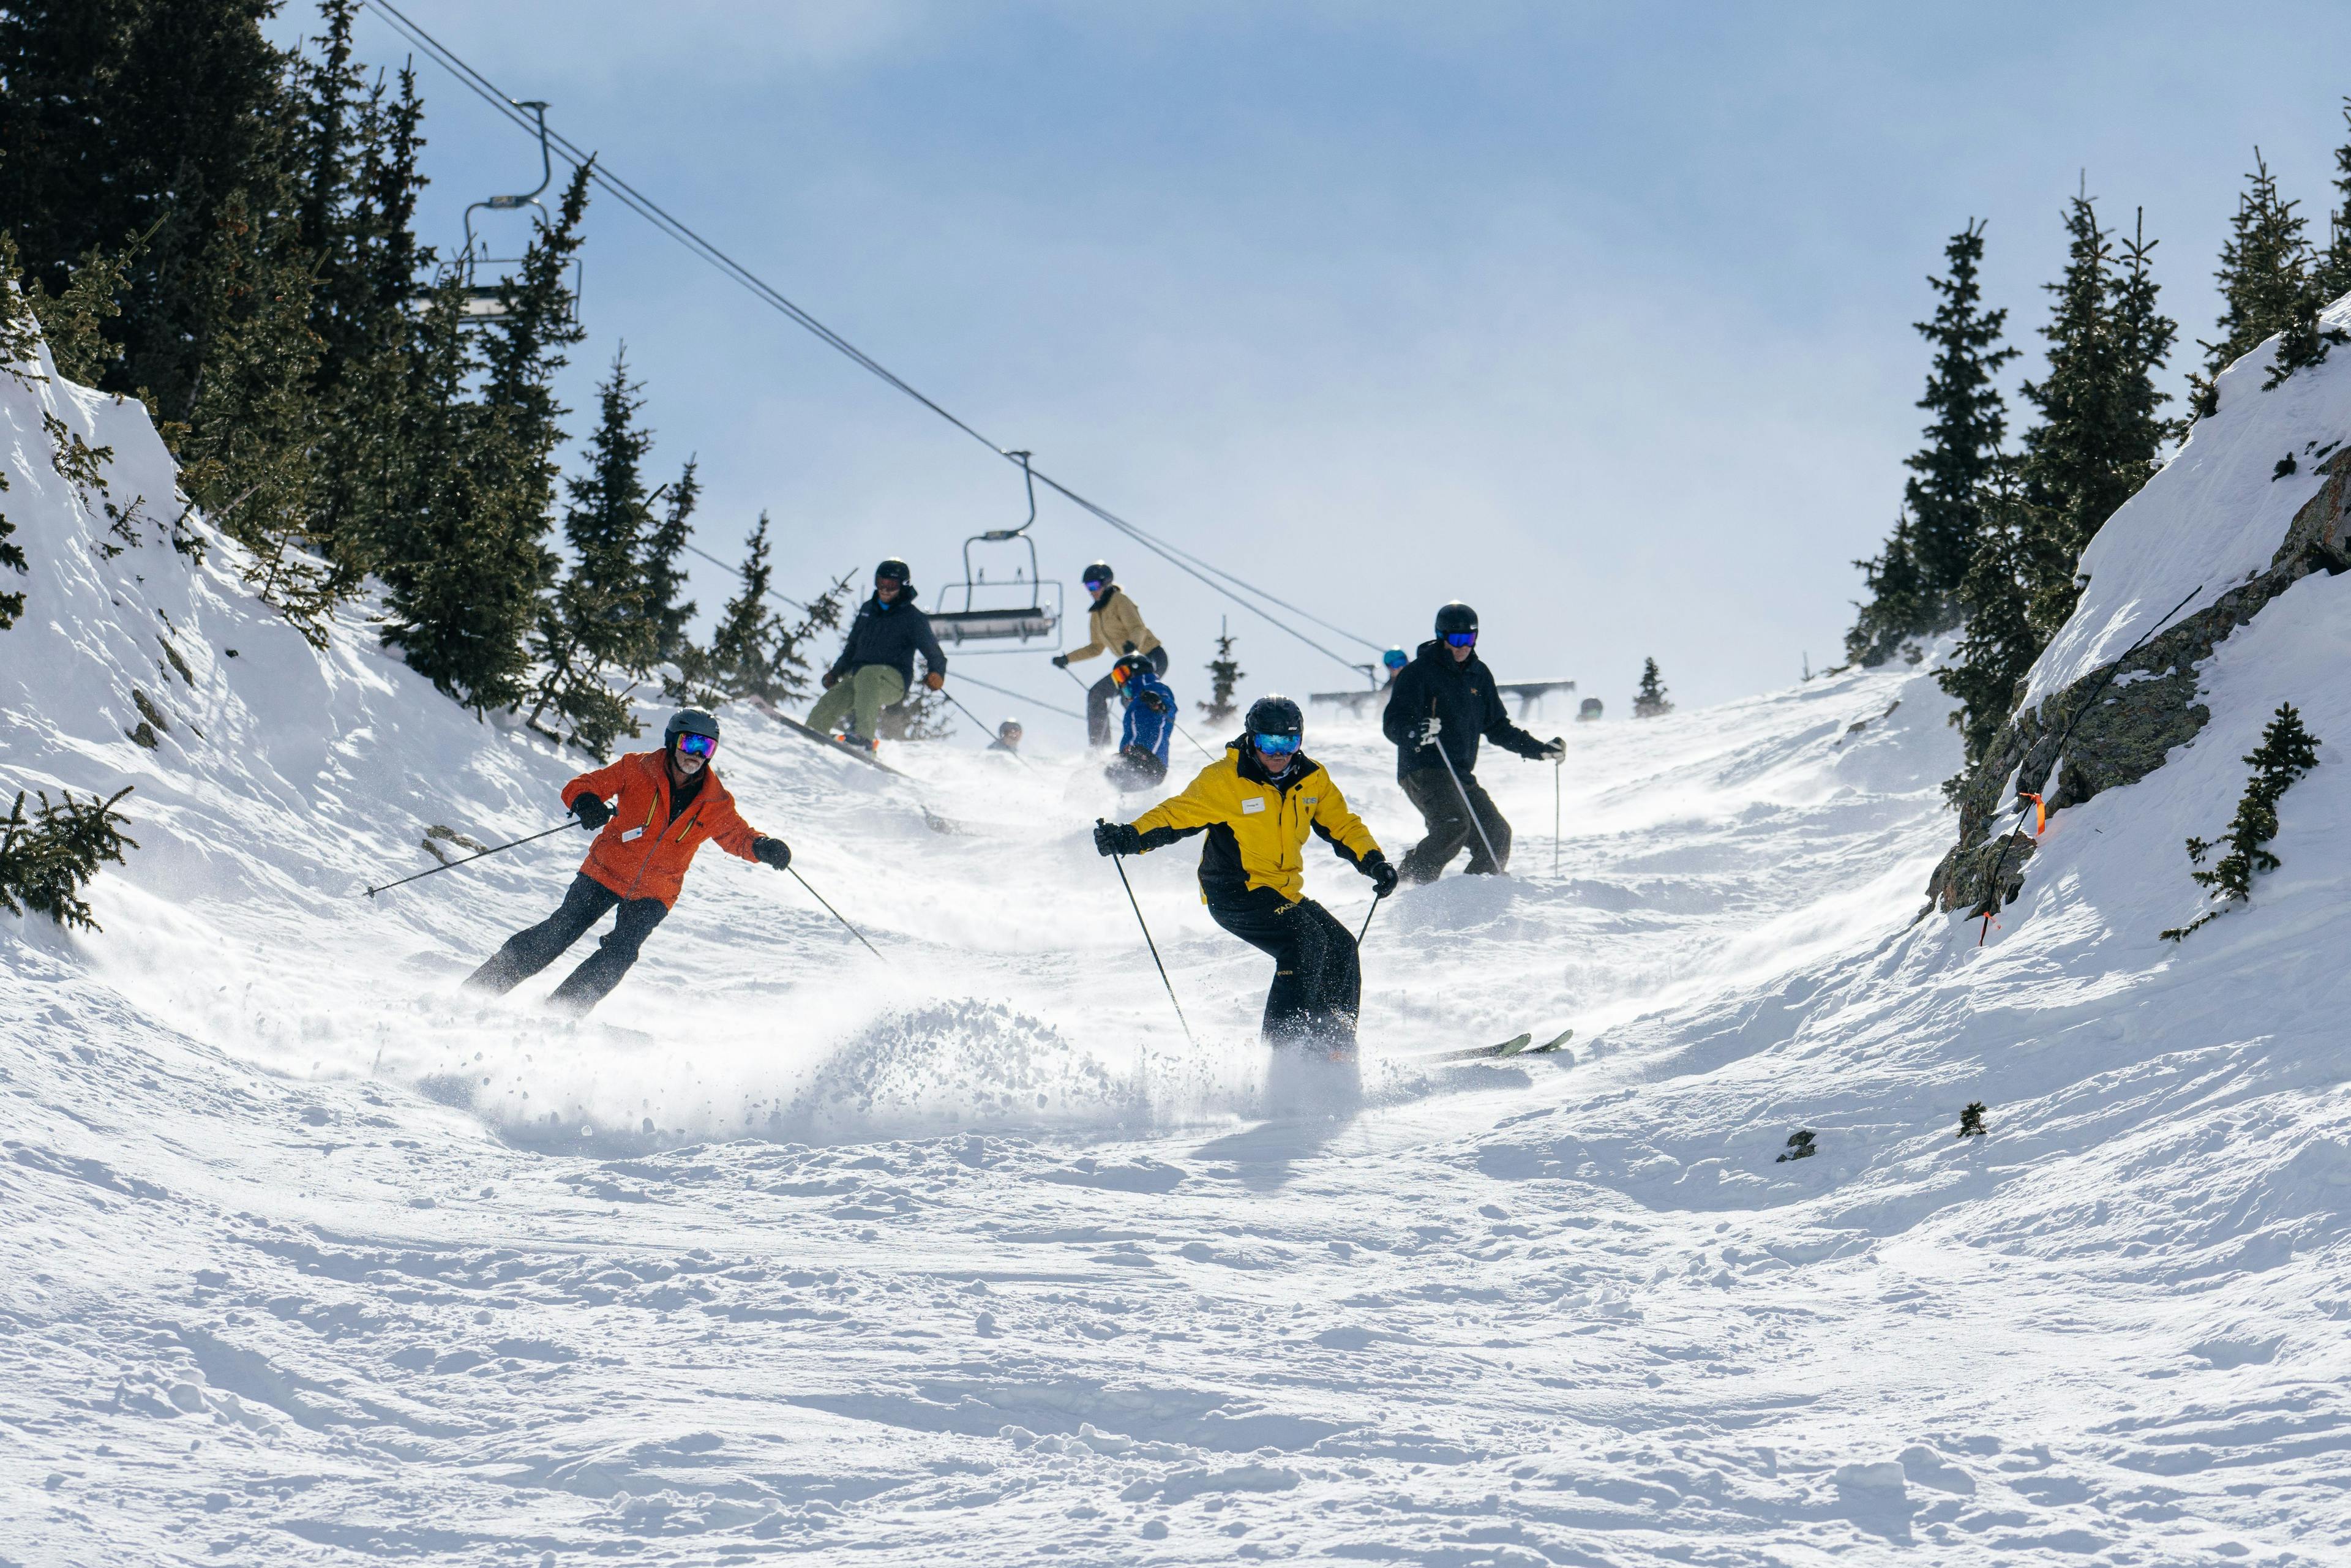 Snowsports instructor leads a group down a chute during a private ski week